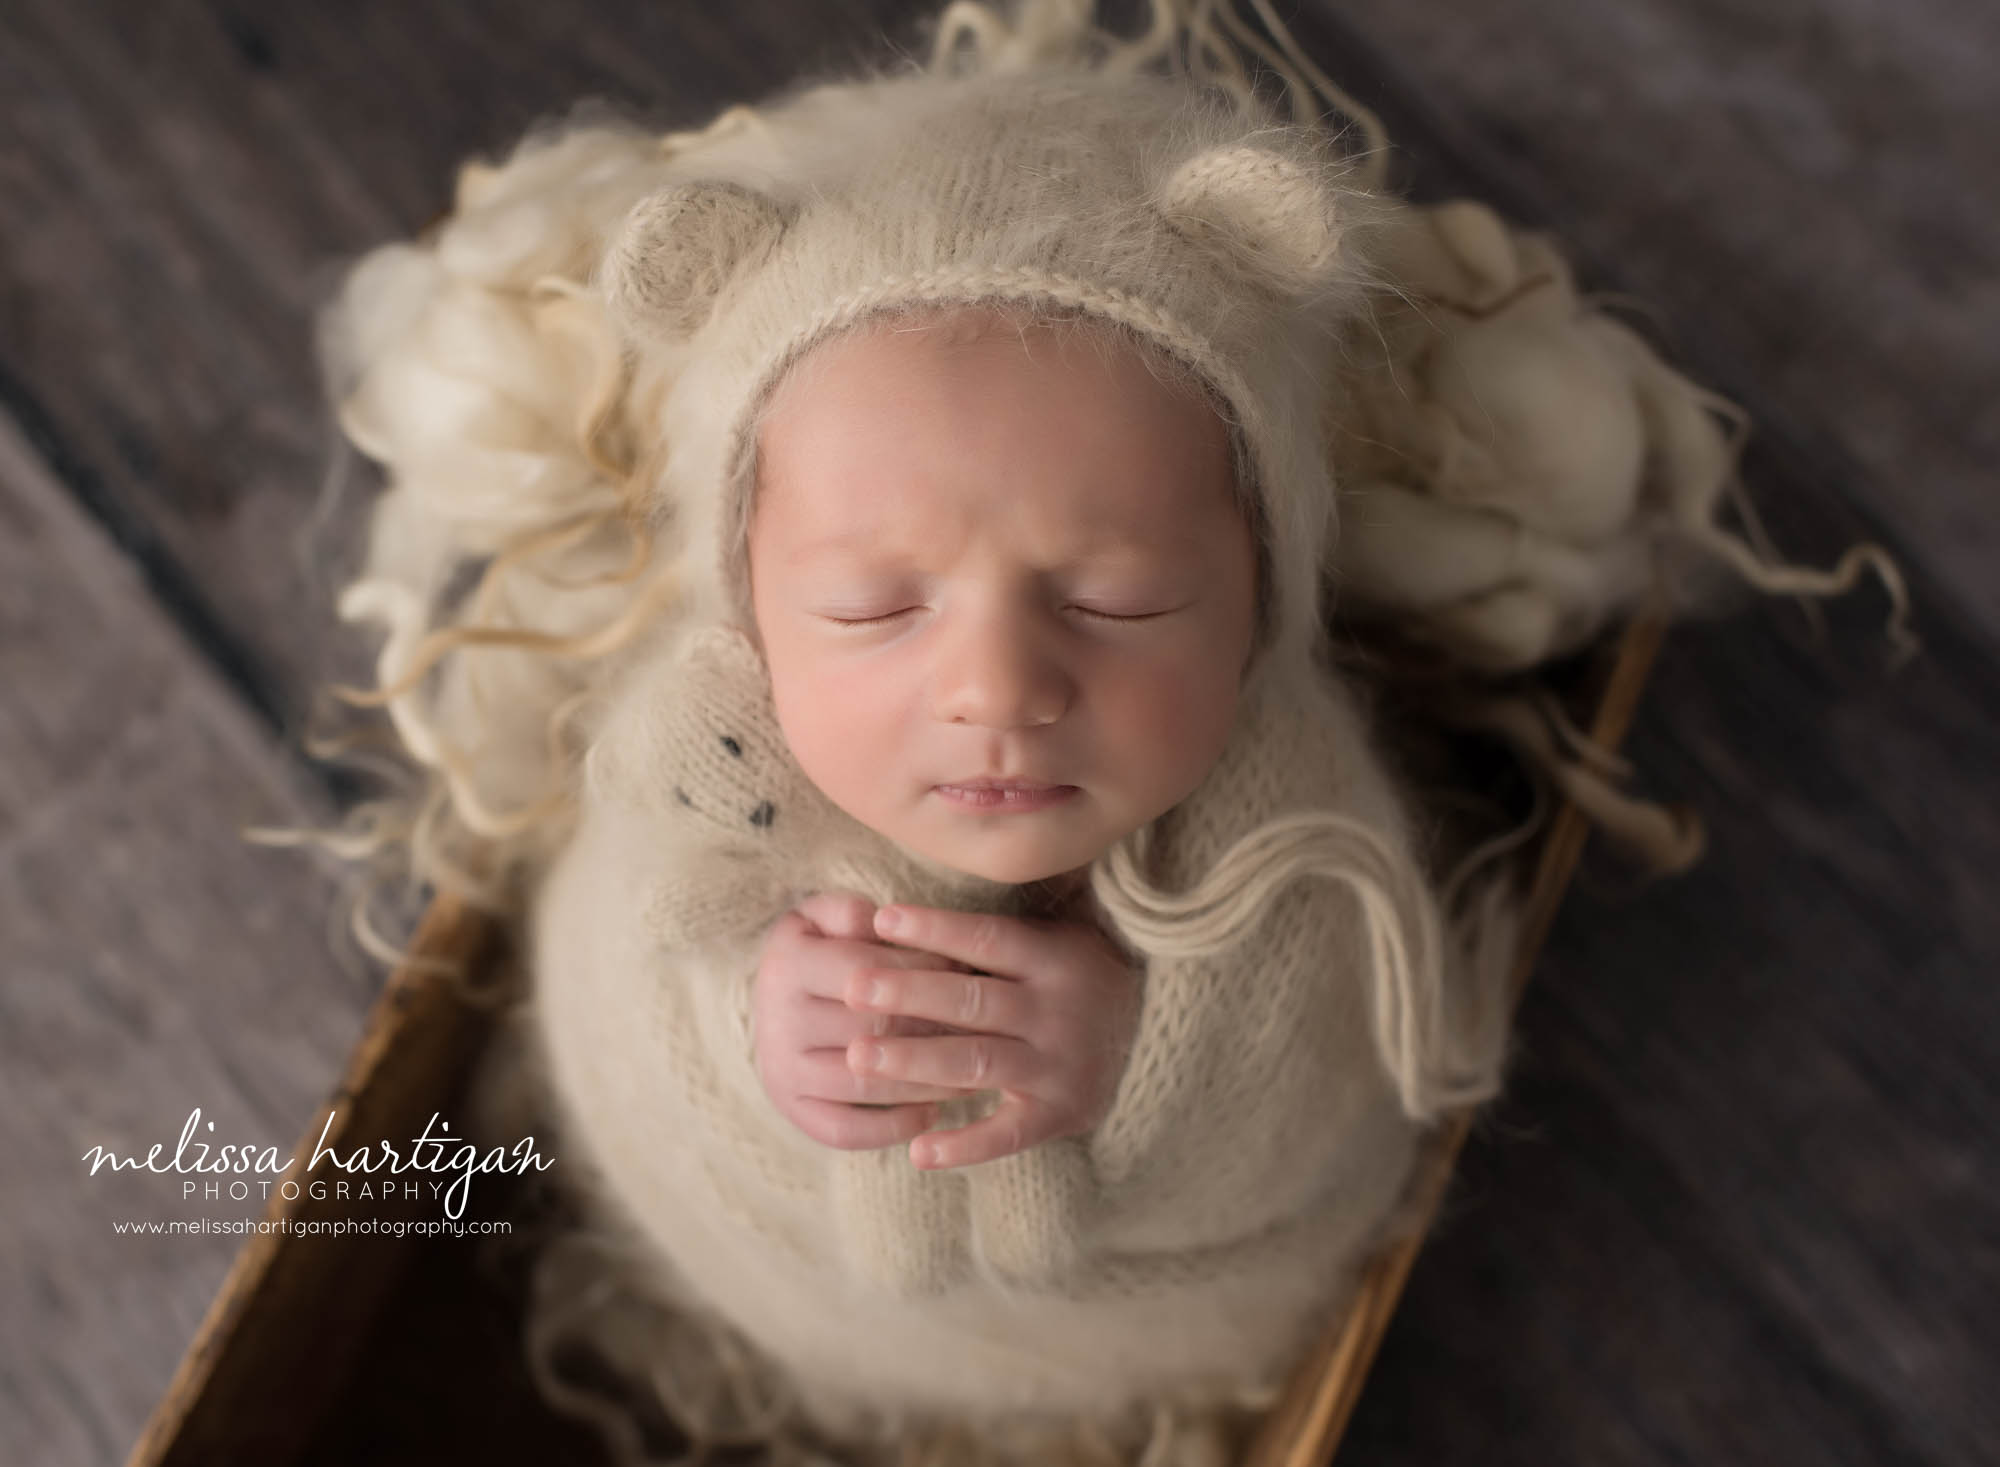 newborn baby boy wrapped in knitted wrap with matching bonnet and knitted angora teddy bear with neutral earth tone colors tolland county newborn photographer